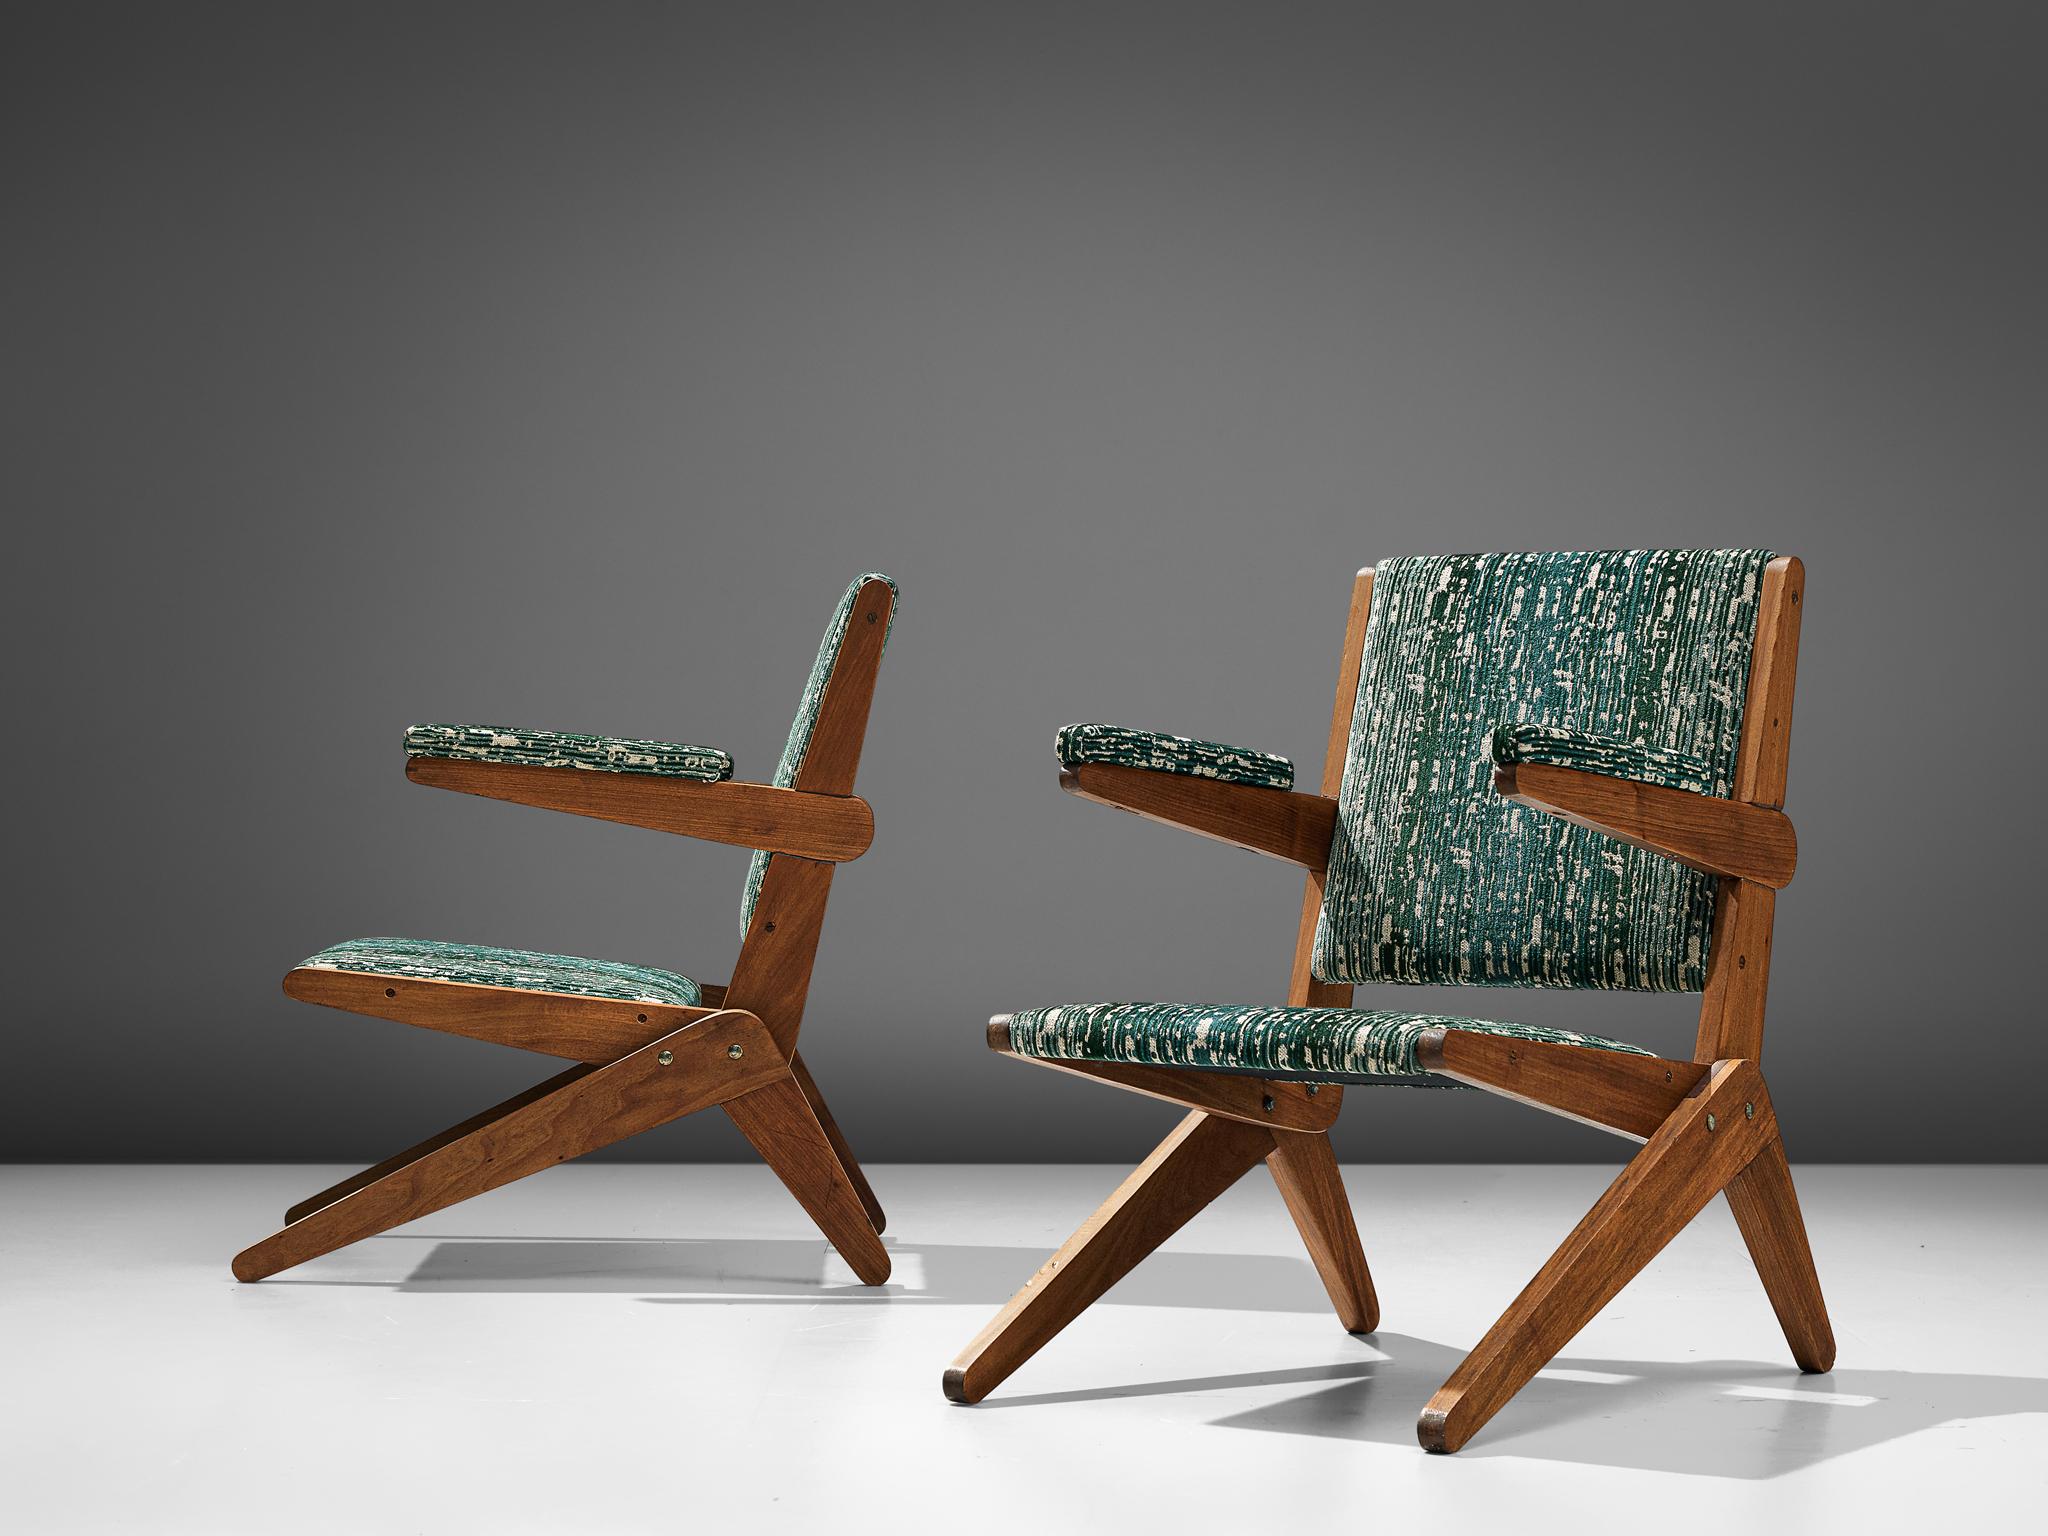 In style of Lina Bo Bardi and Giancarlo Palanti for Studio D'Arte, pair of 'Peroba de Rose' armchairs, Brazilian hardwood and fabric, Brazil, 1950's

A Brazilian pair of easy chairs designed in the style of Lina Bo Bradi and Giancarlo Palanti for